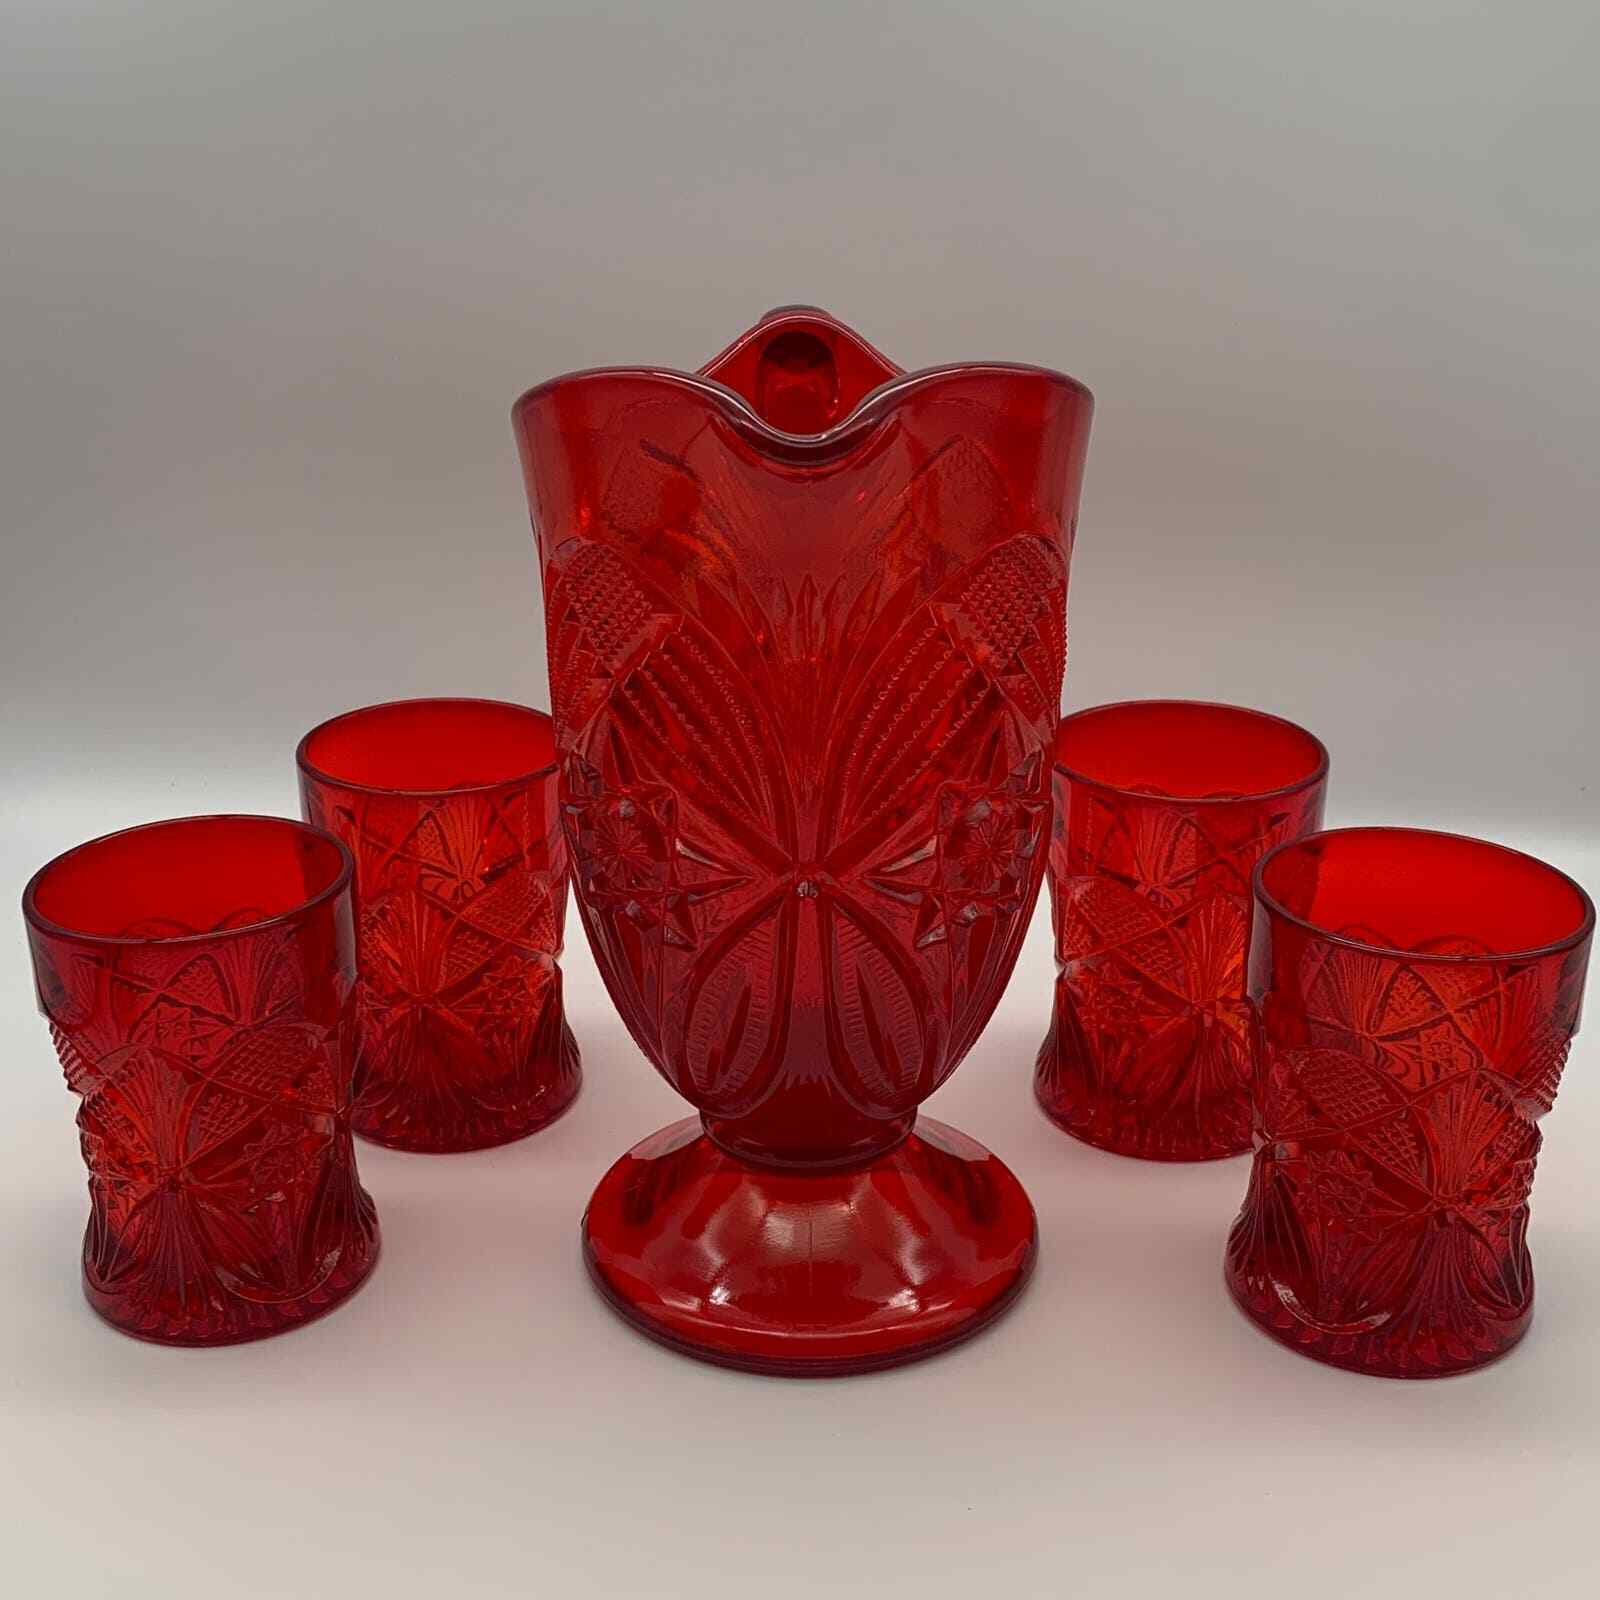 Mosser Vibrant Ruby Red Pitcher w/4 Tumblers, Cambridge Glass Co. 2579 